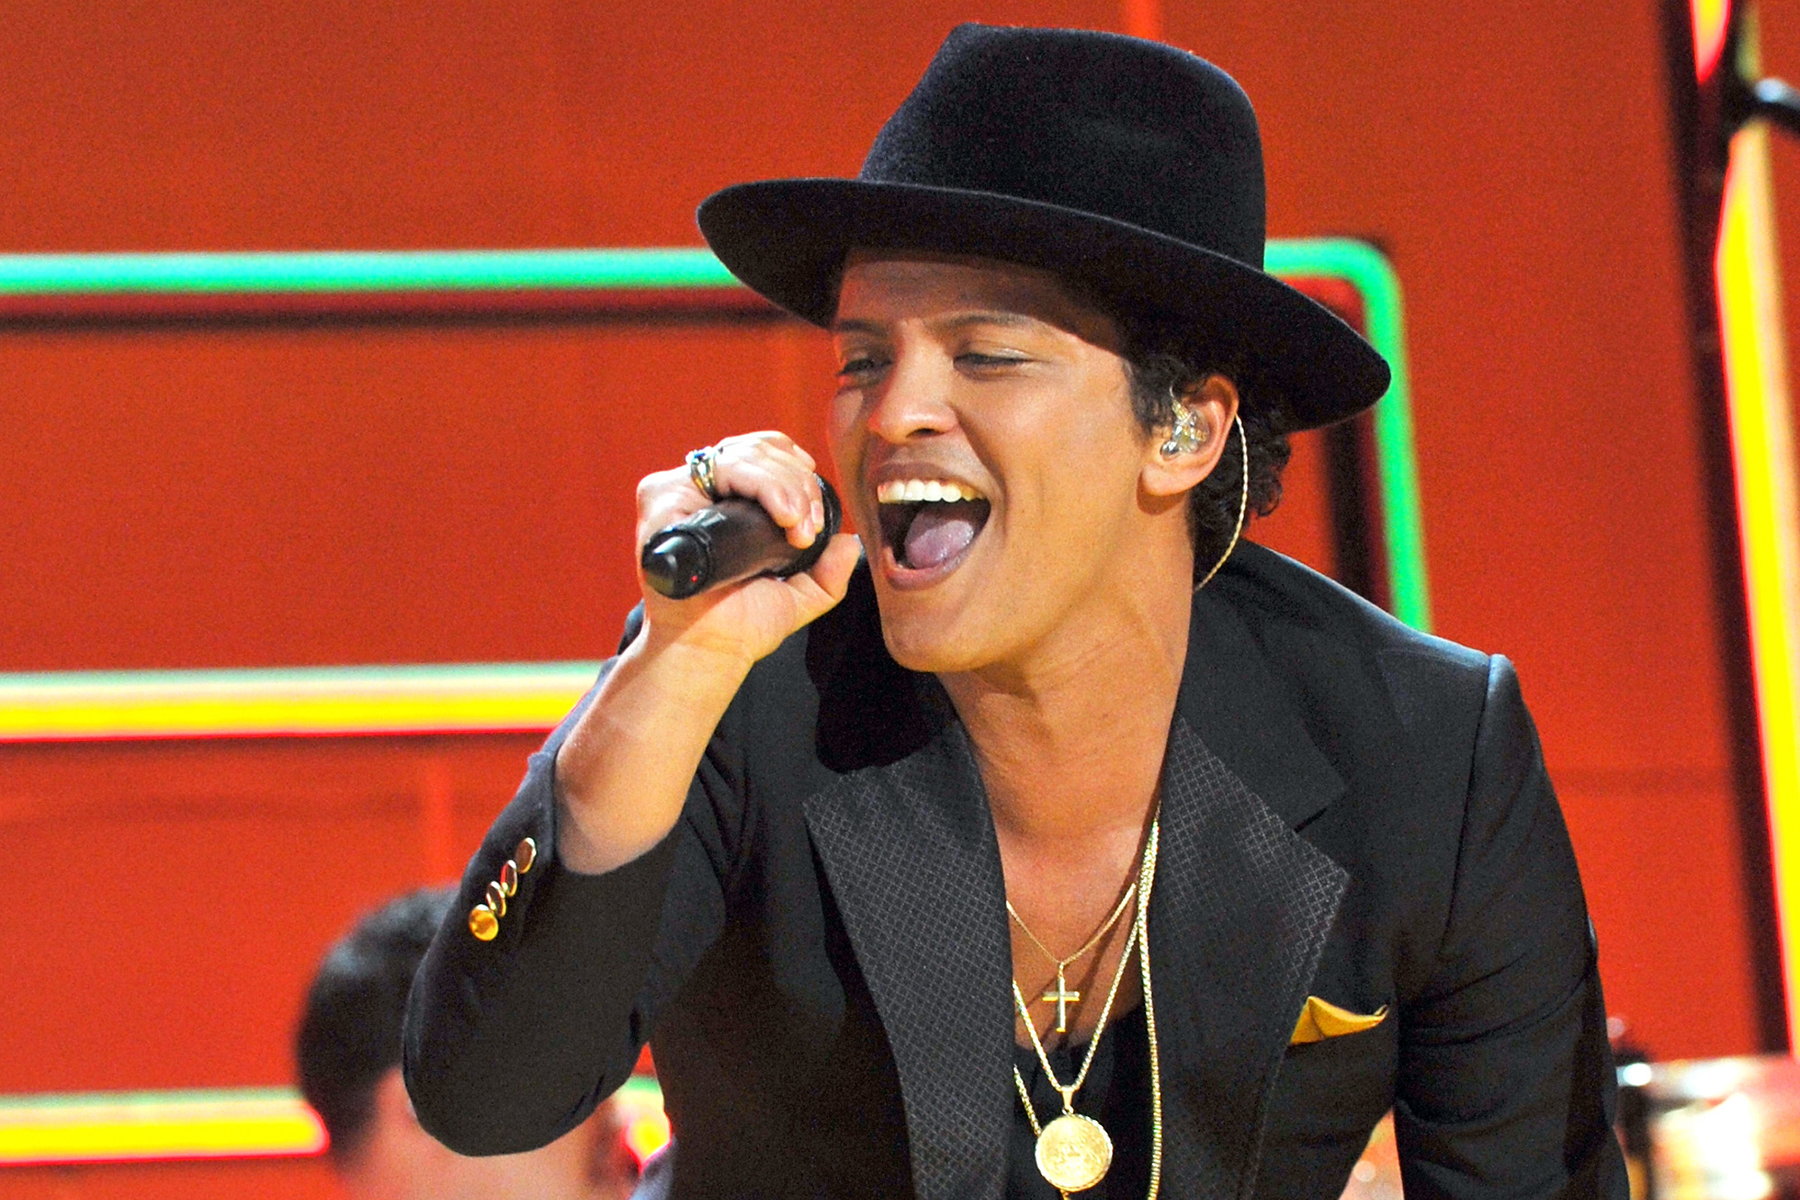 Bruno Mars Net Worth Everyone Want to Know His Early Life, Career